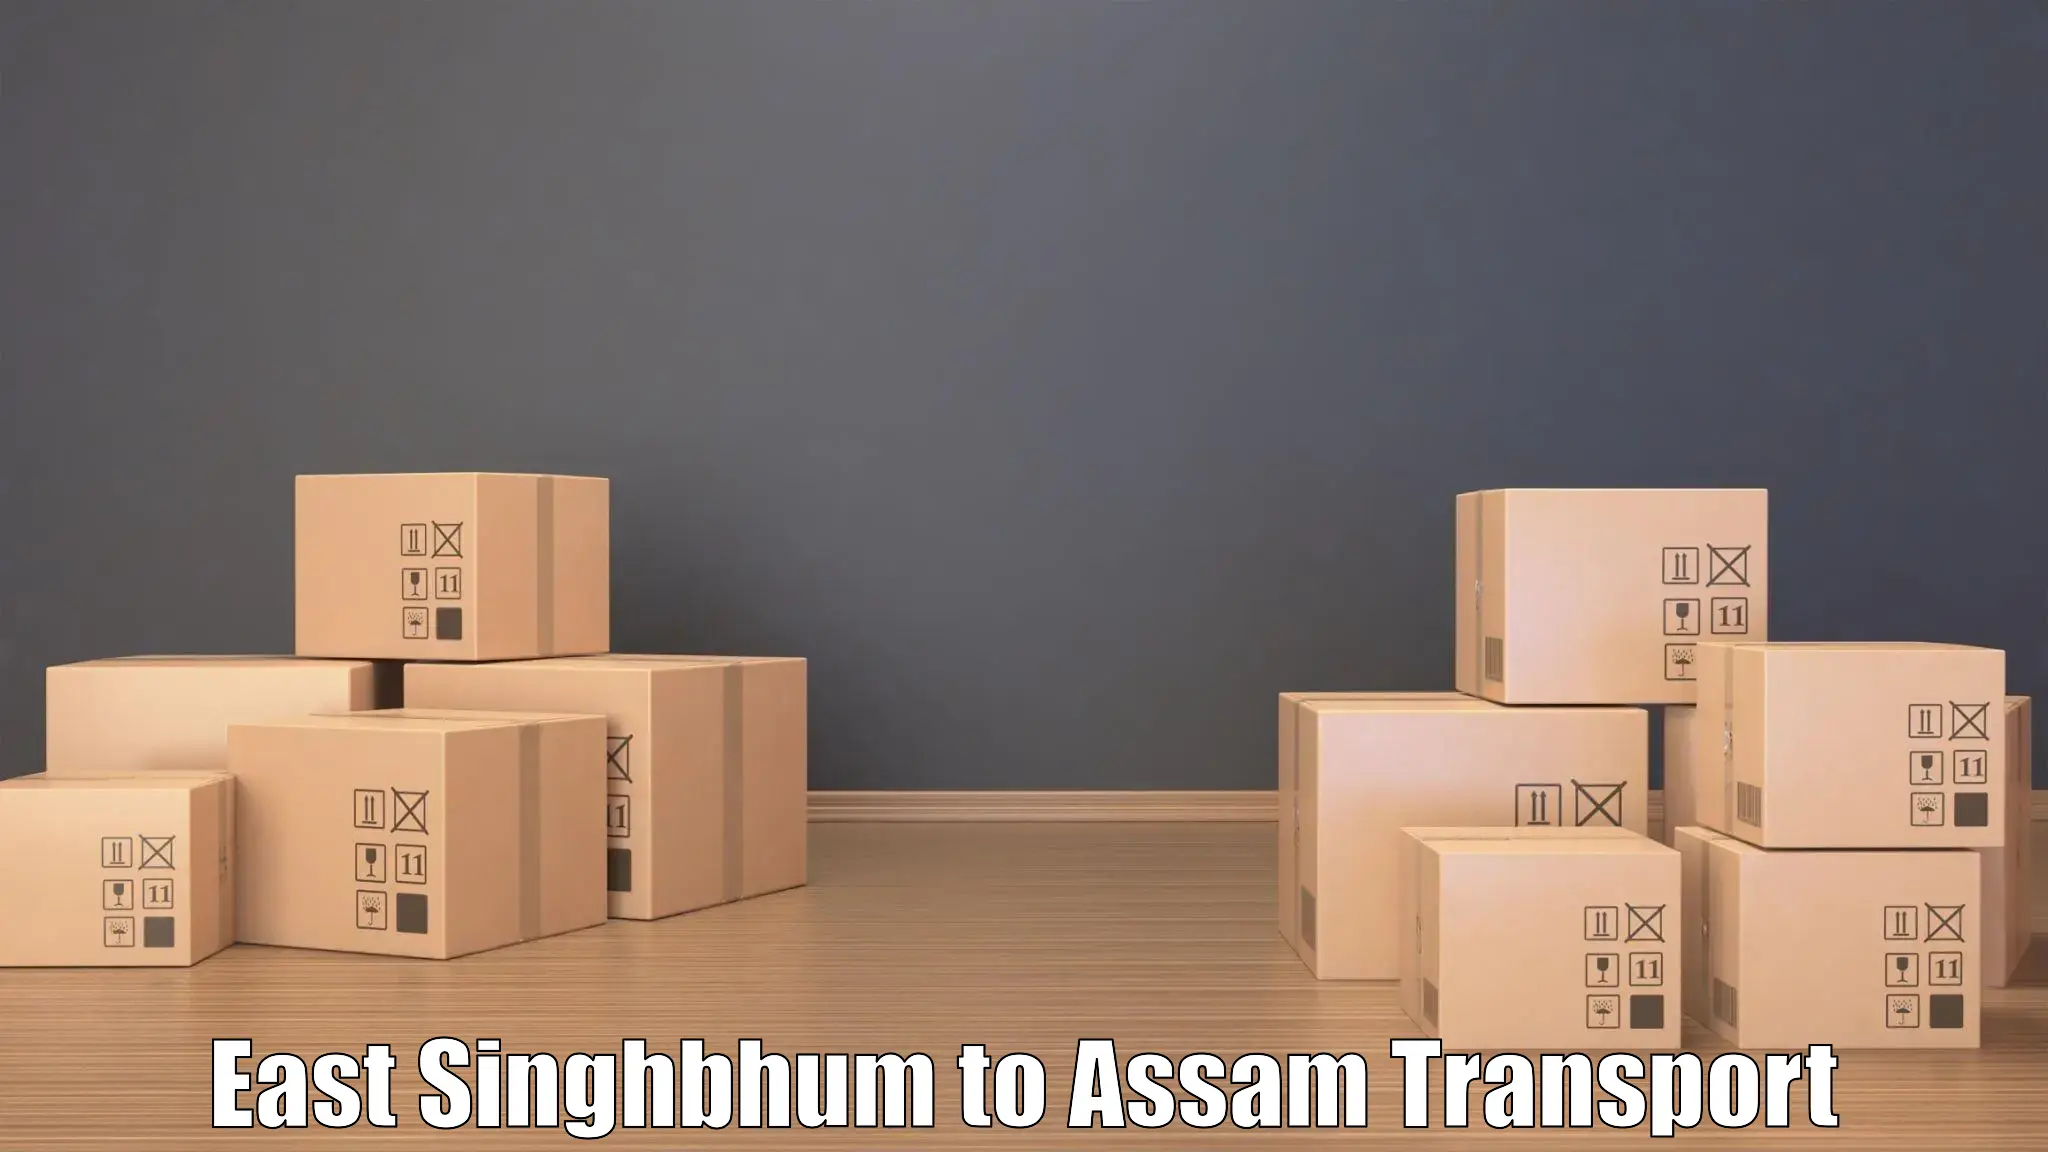 Goods delivery service East Singhbhum to Jonai